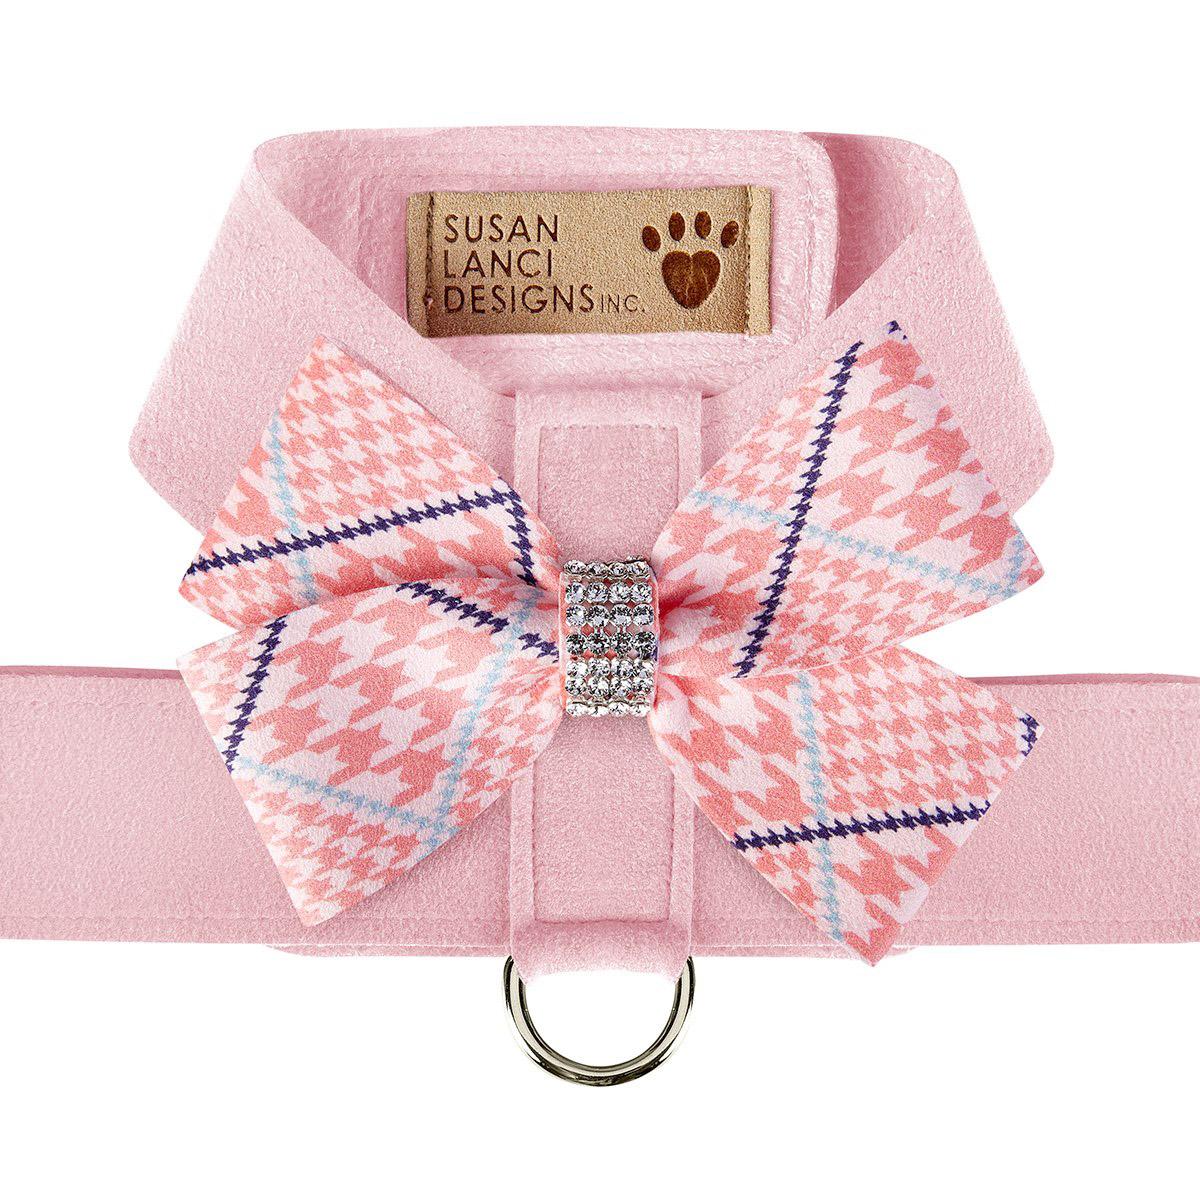 Peaches & Cream Glen Houndstooth Nouveau Bow Tinkie Dog Harness by Susan Lanci - Puppy Pink